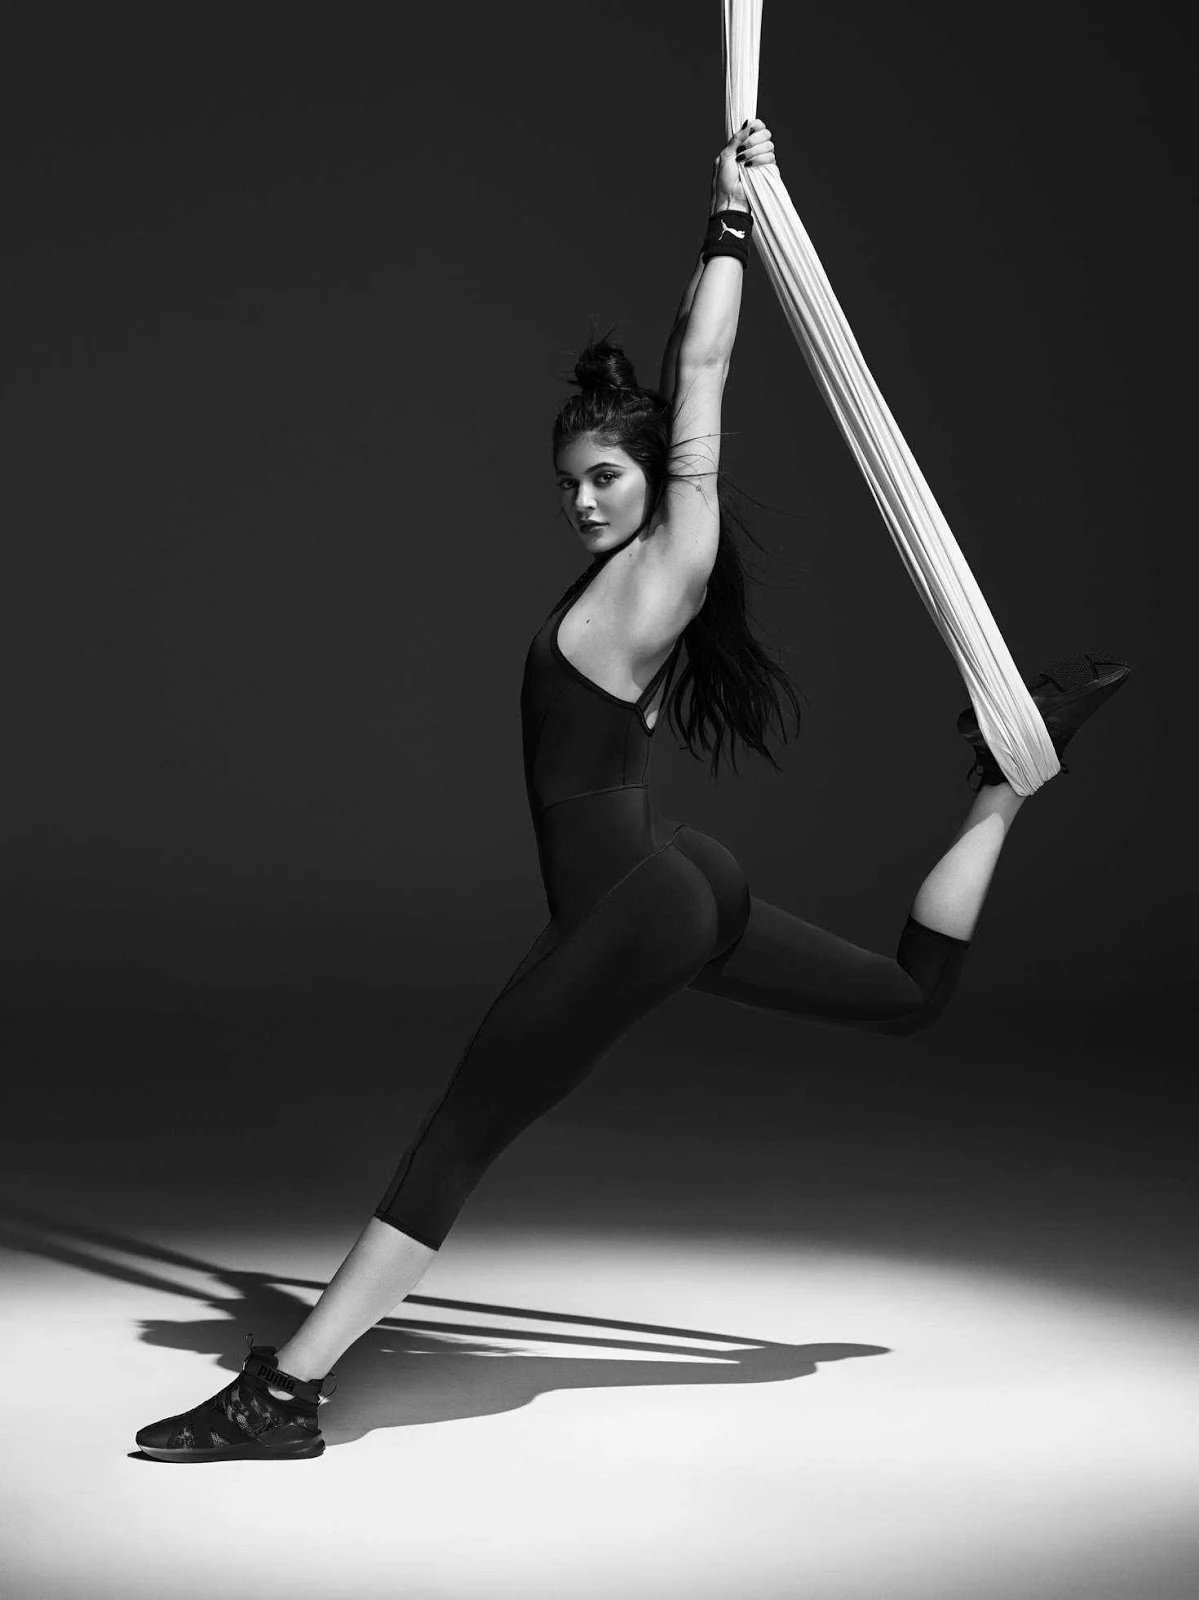 Kylie Jenner flaunts incredible physique for Puma's Spring/Summer 2017 Campaign